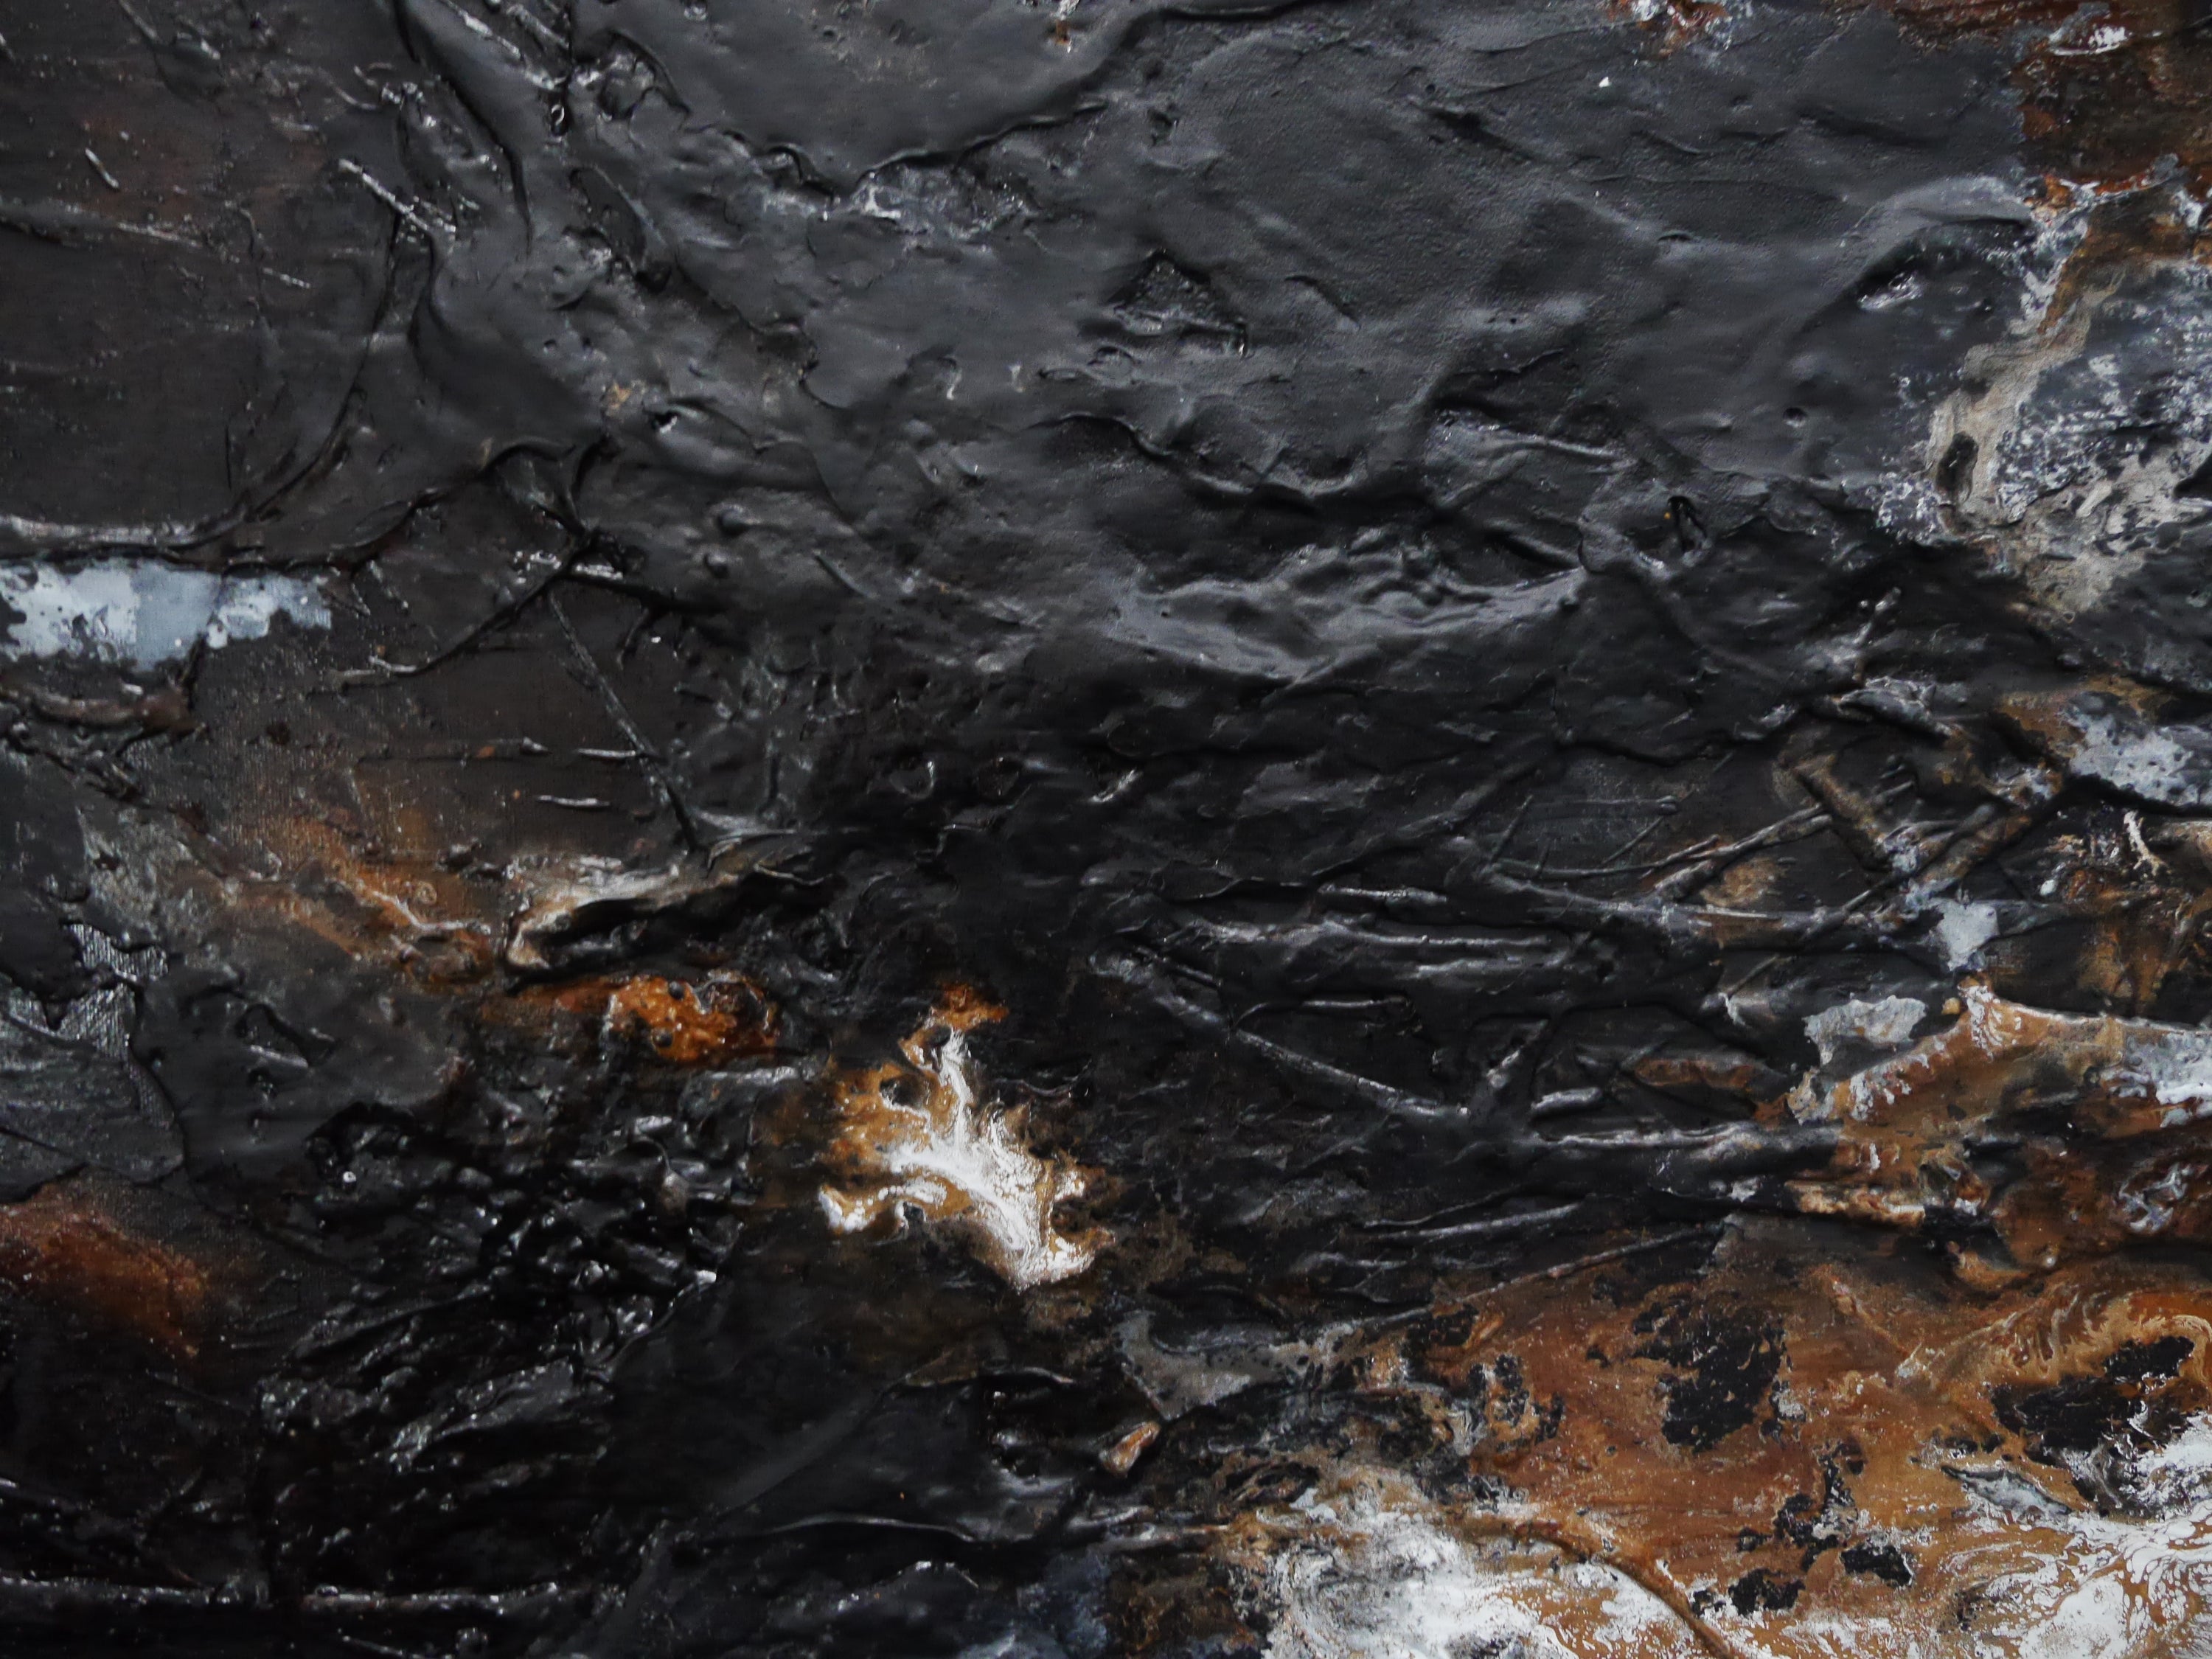 Rusting Black Ice 160cm x 60cm Rustic Textured Abstract Painting